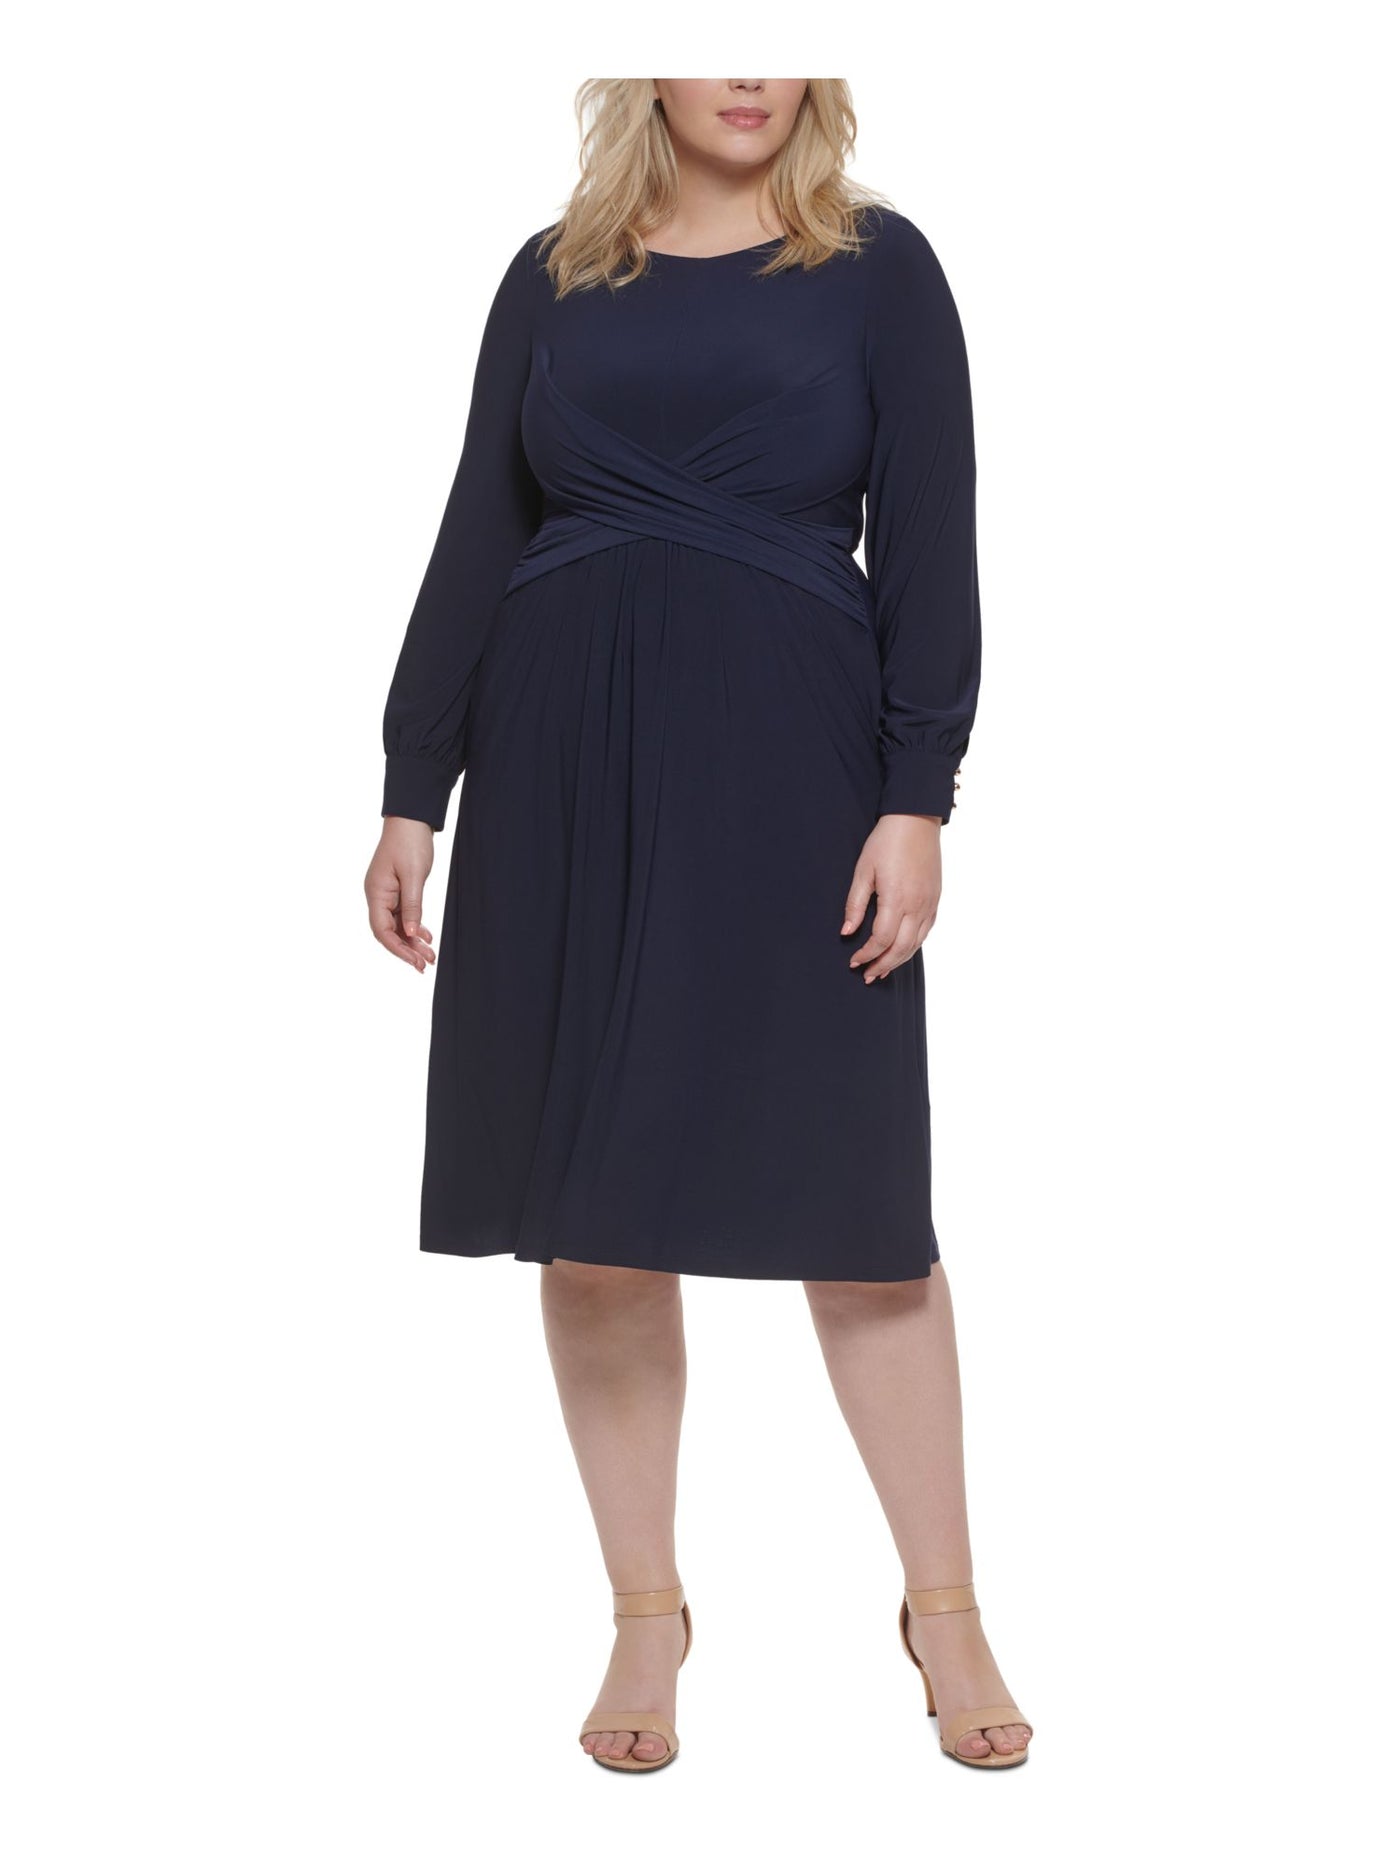 JESSICA HOWARD Womens Navy Stretch Zippered Crossover Detail At Waist Long Sleeve Jewel Neck Knee Length Wear To Work Fit + Flare Dress Plus 24W